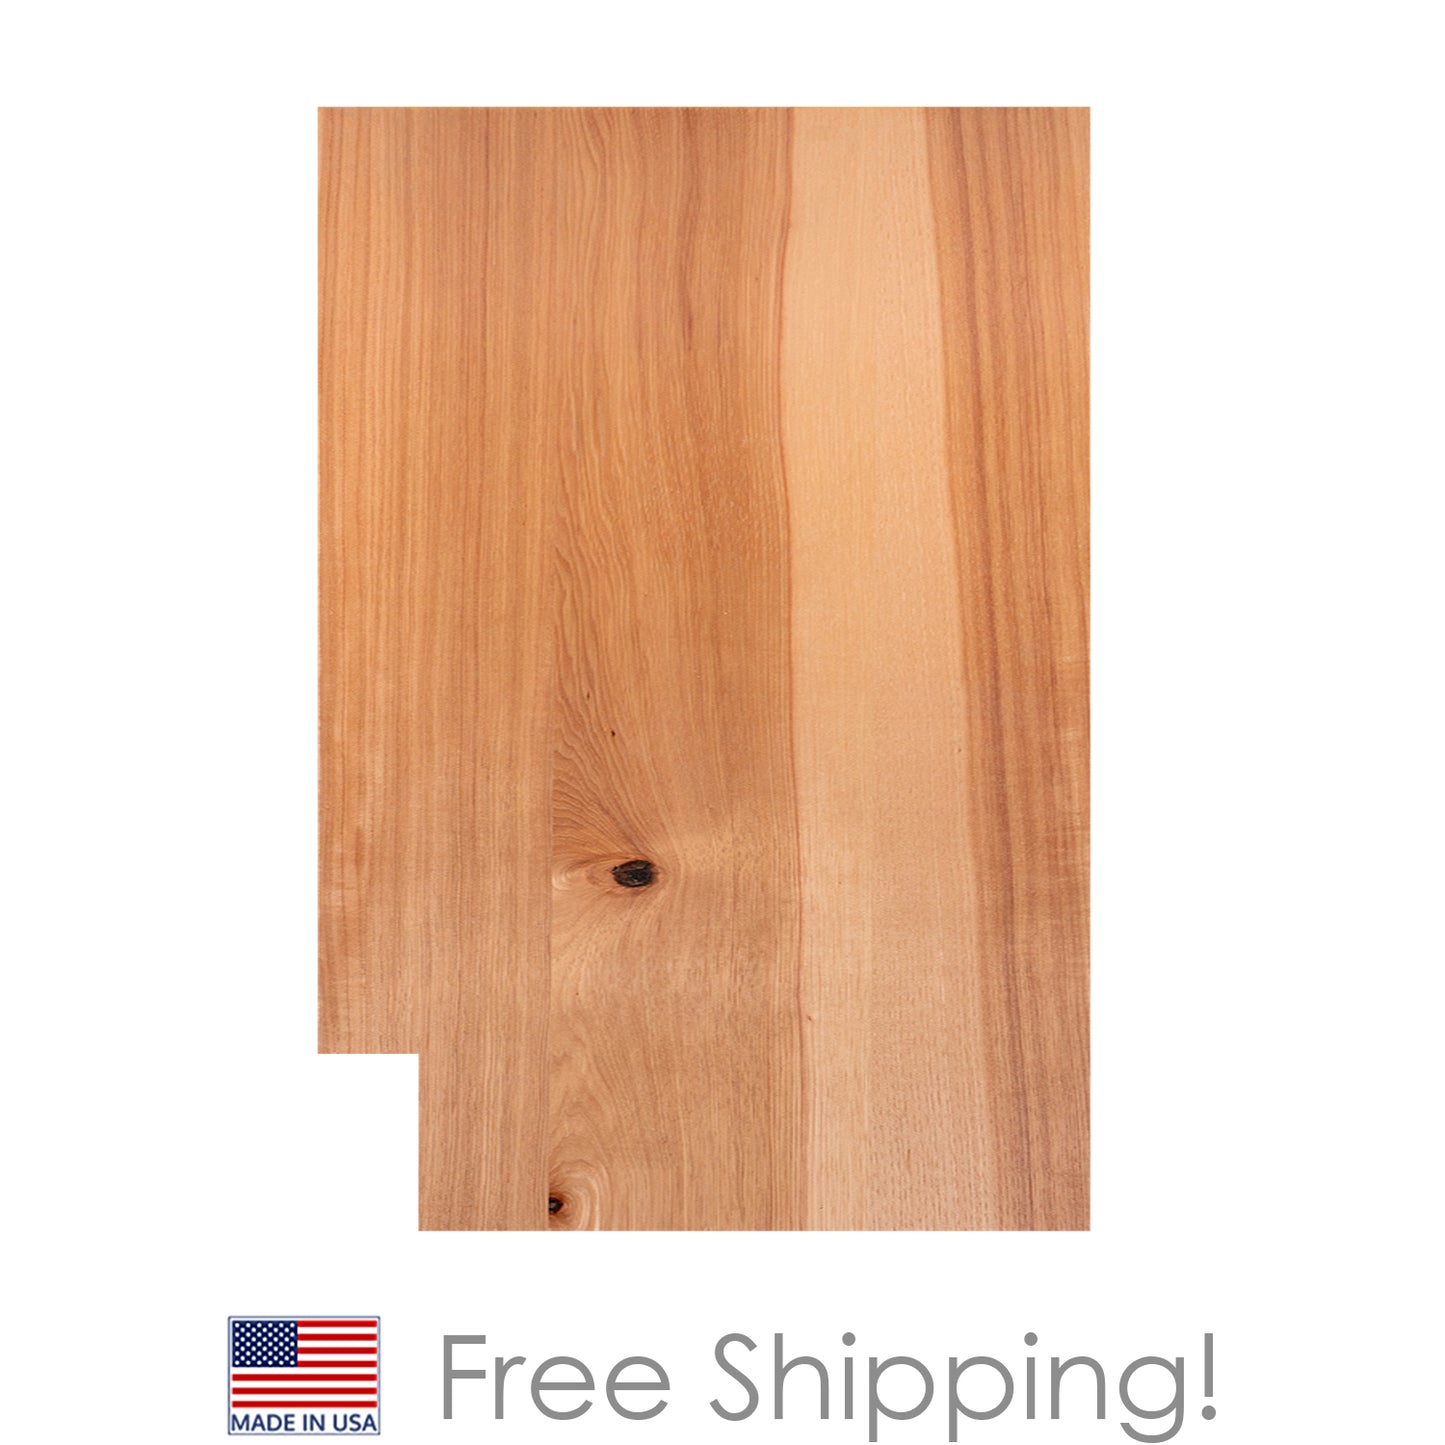 Quicklock RTA (Ready-to-Assemble) Rustic Hickory .25"X23.25"X34.5" End Panel - Right Side